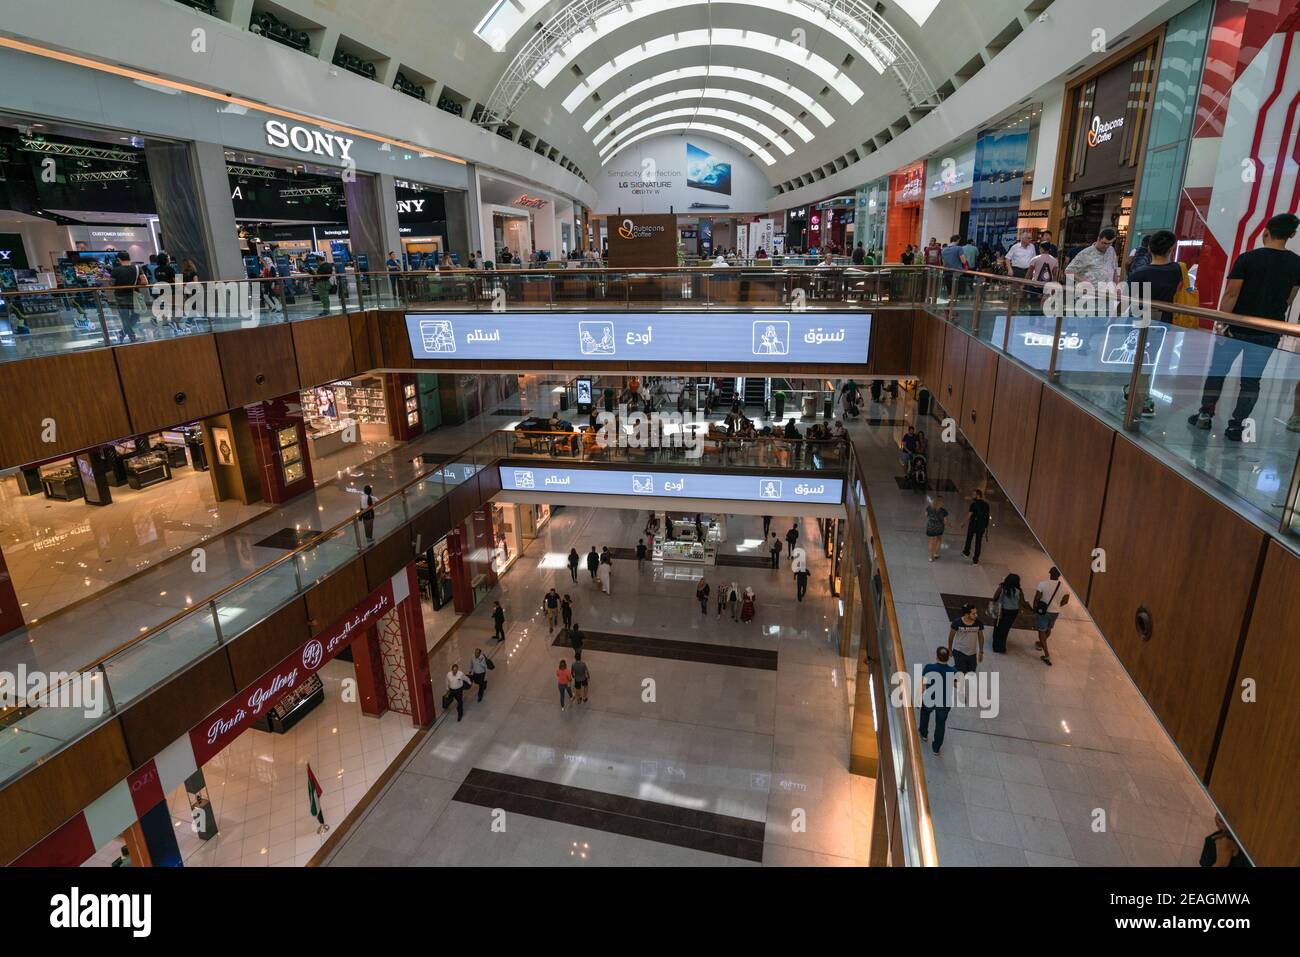 Dubai, UAE - 12.01.2019: People walking by and shopping inside of the Dubai Mall. Several shopping floors, busy as usual. Stock Photo